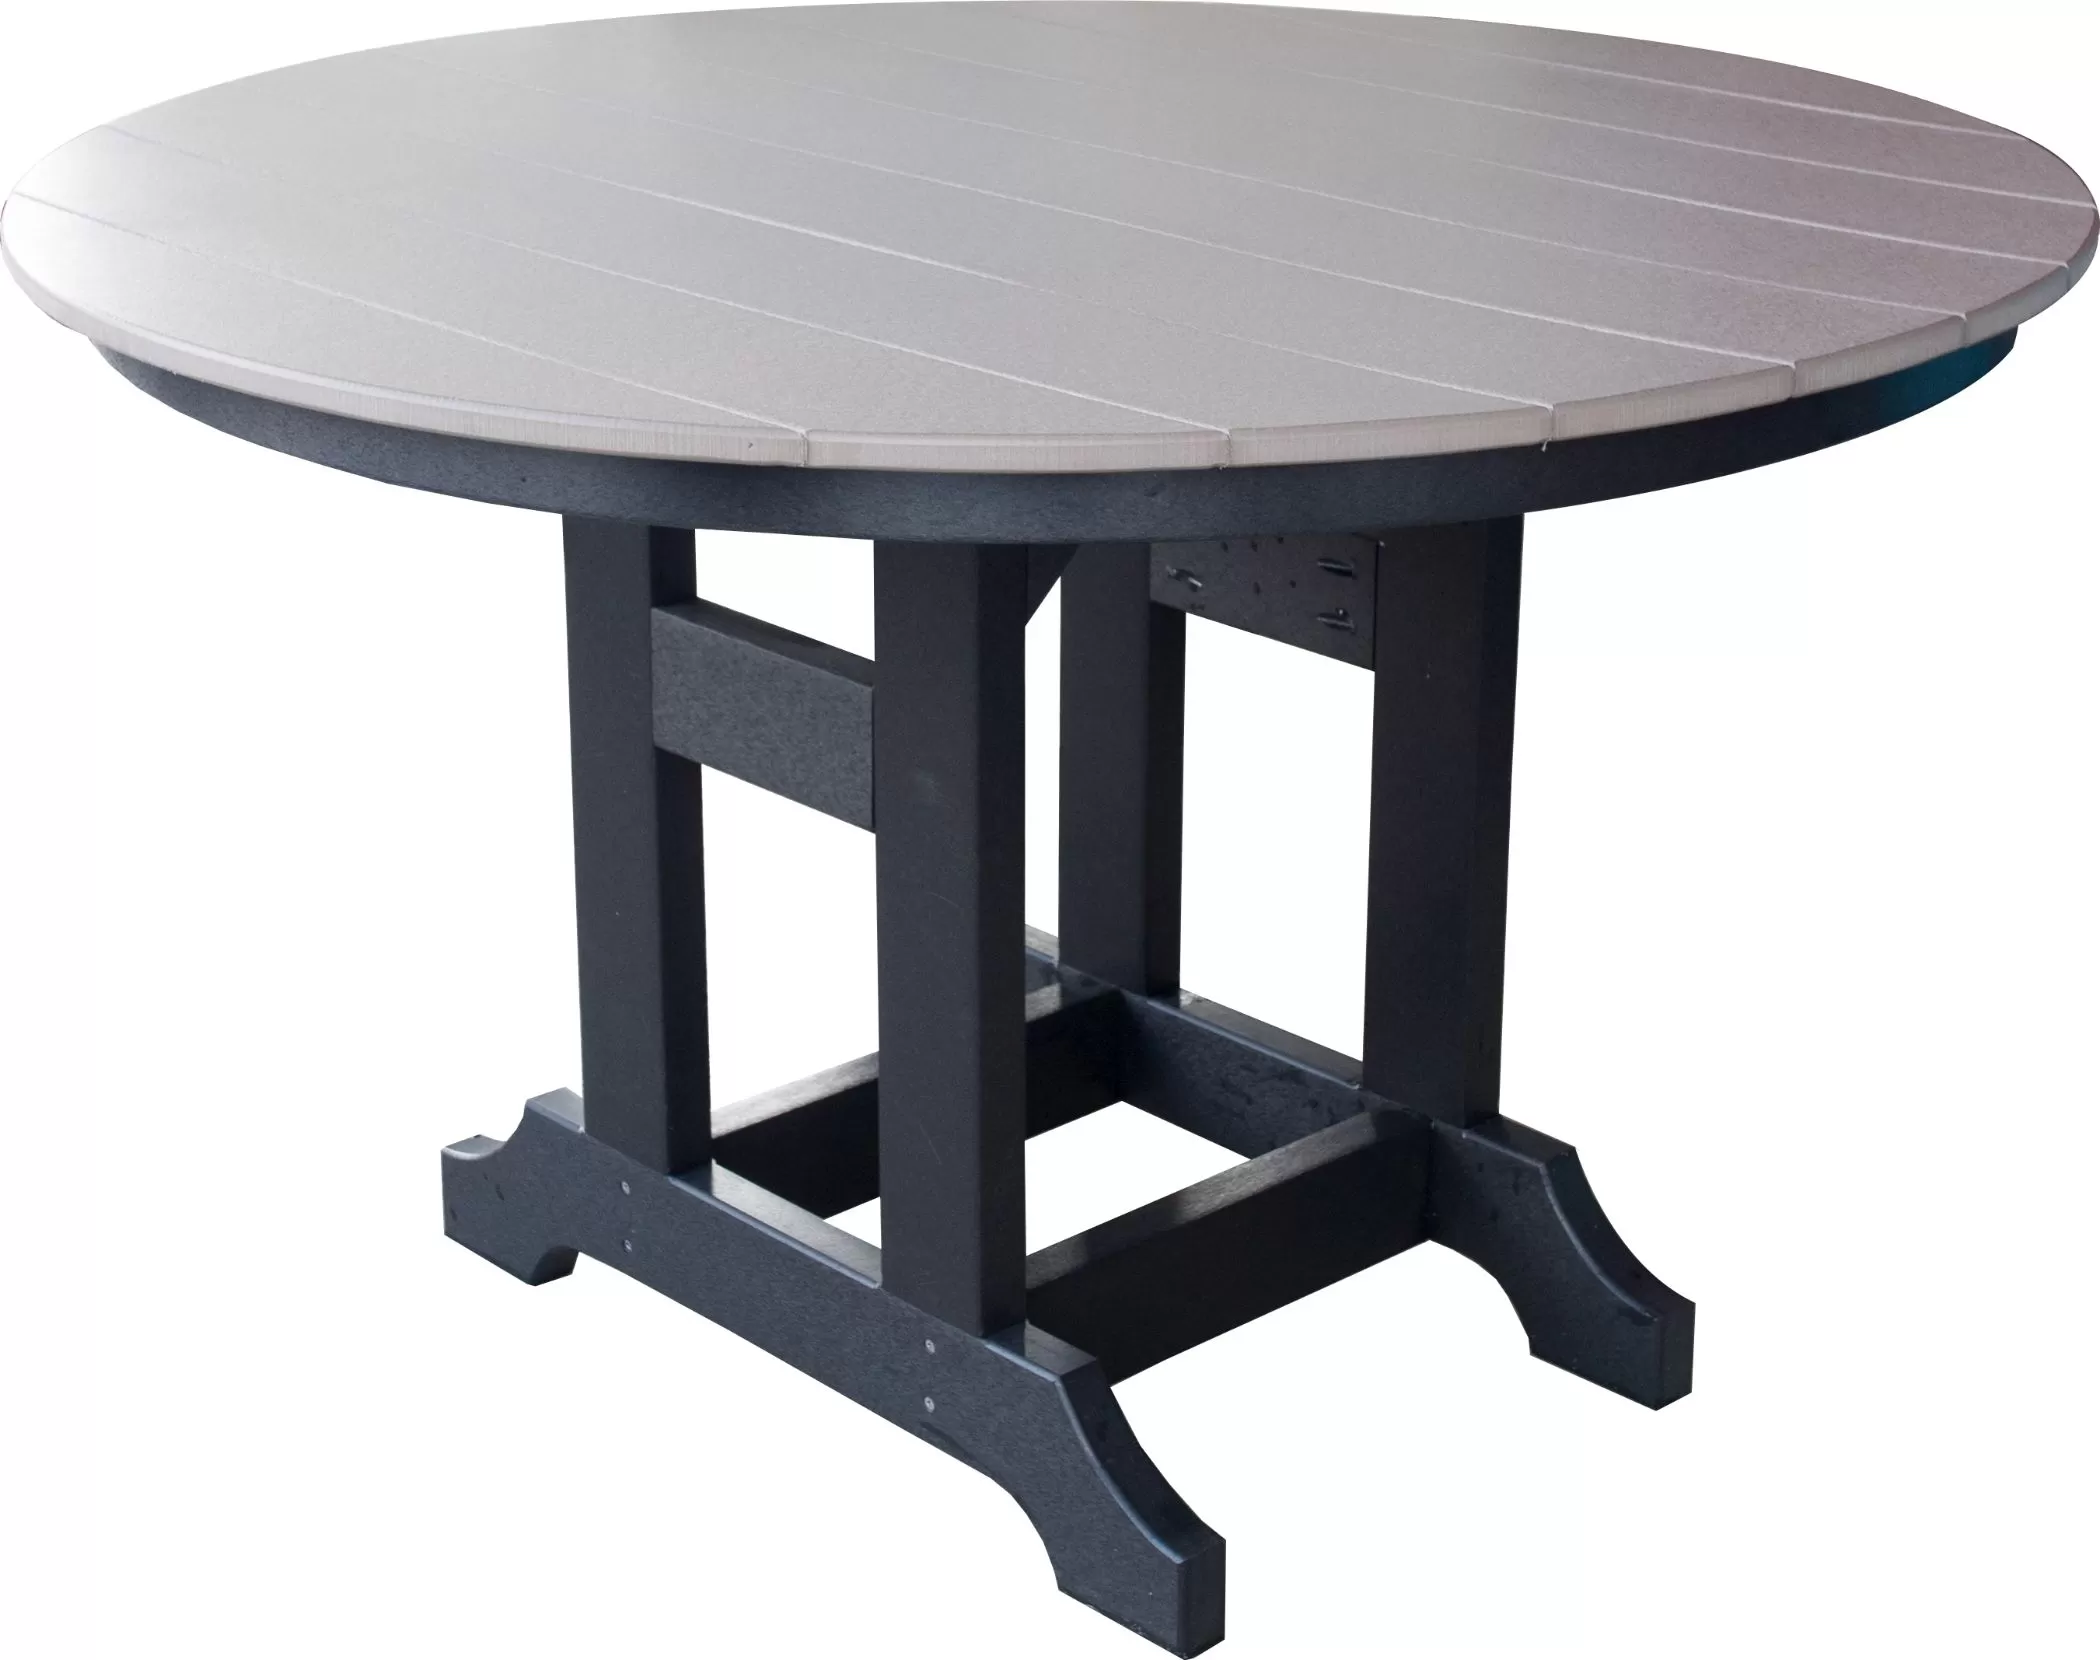 48" Round HB Dining Table